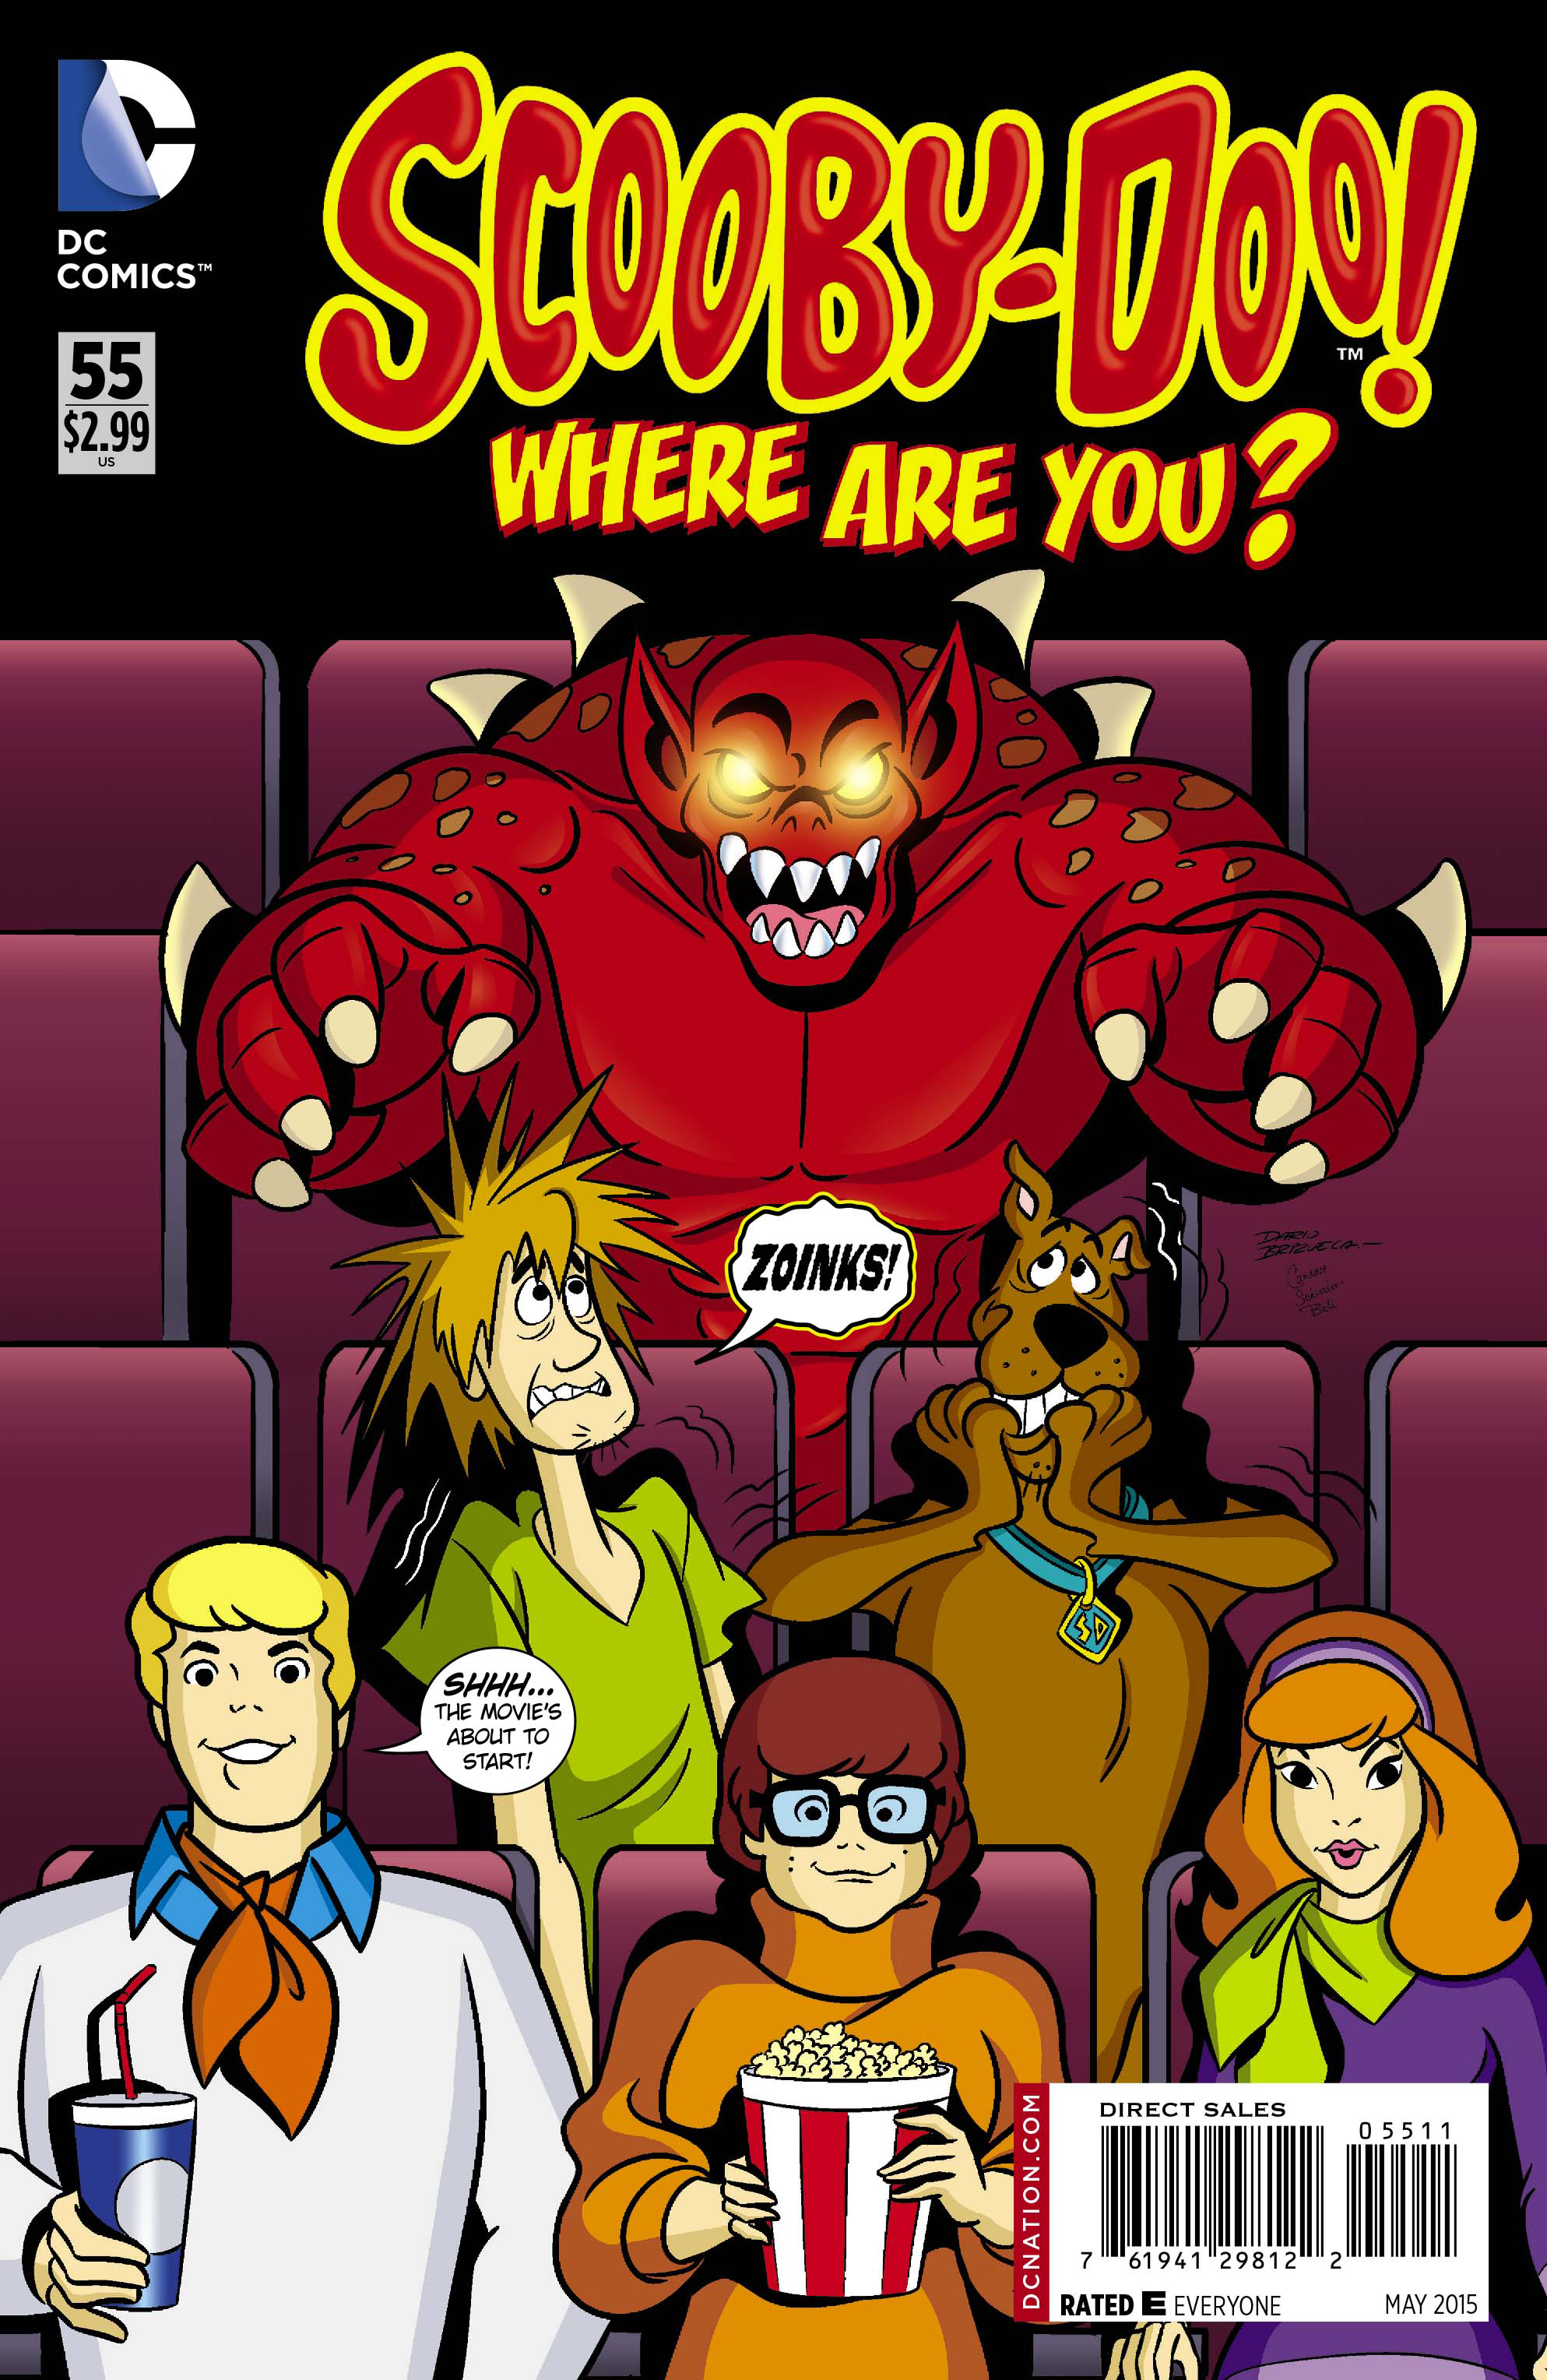 SCOOBY DOO WHERE ARE YOU #55